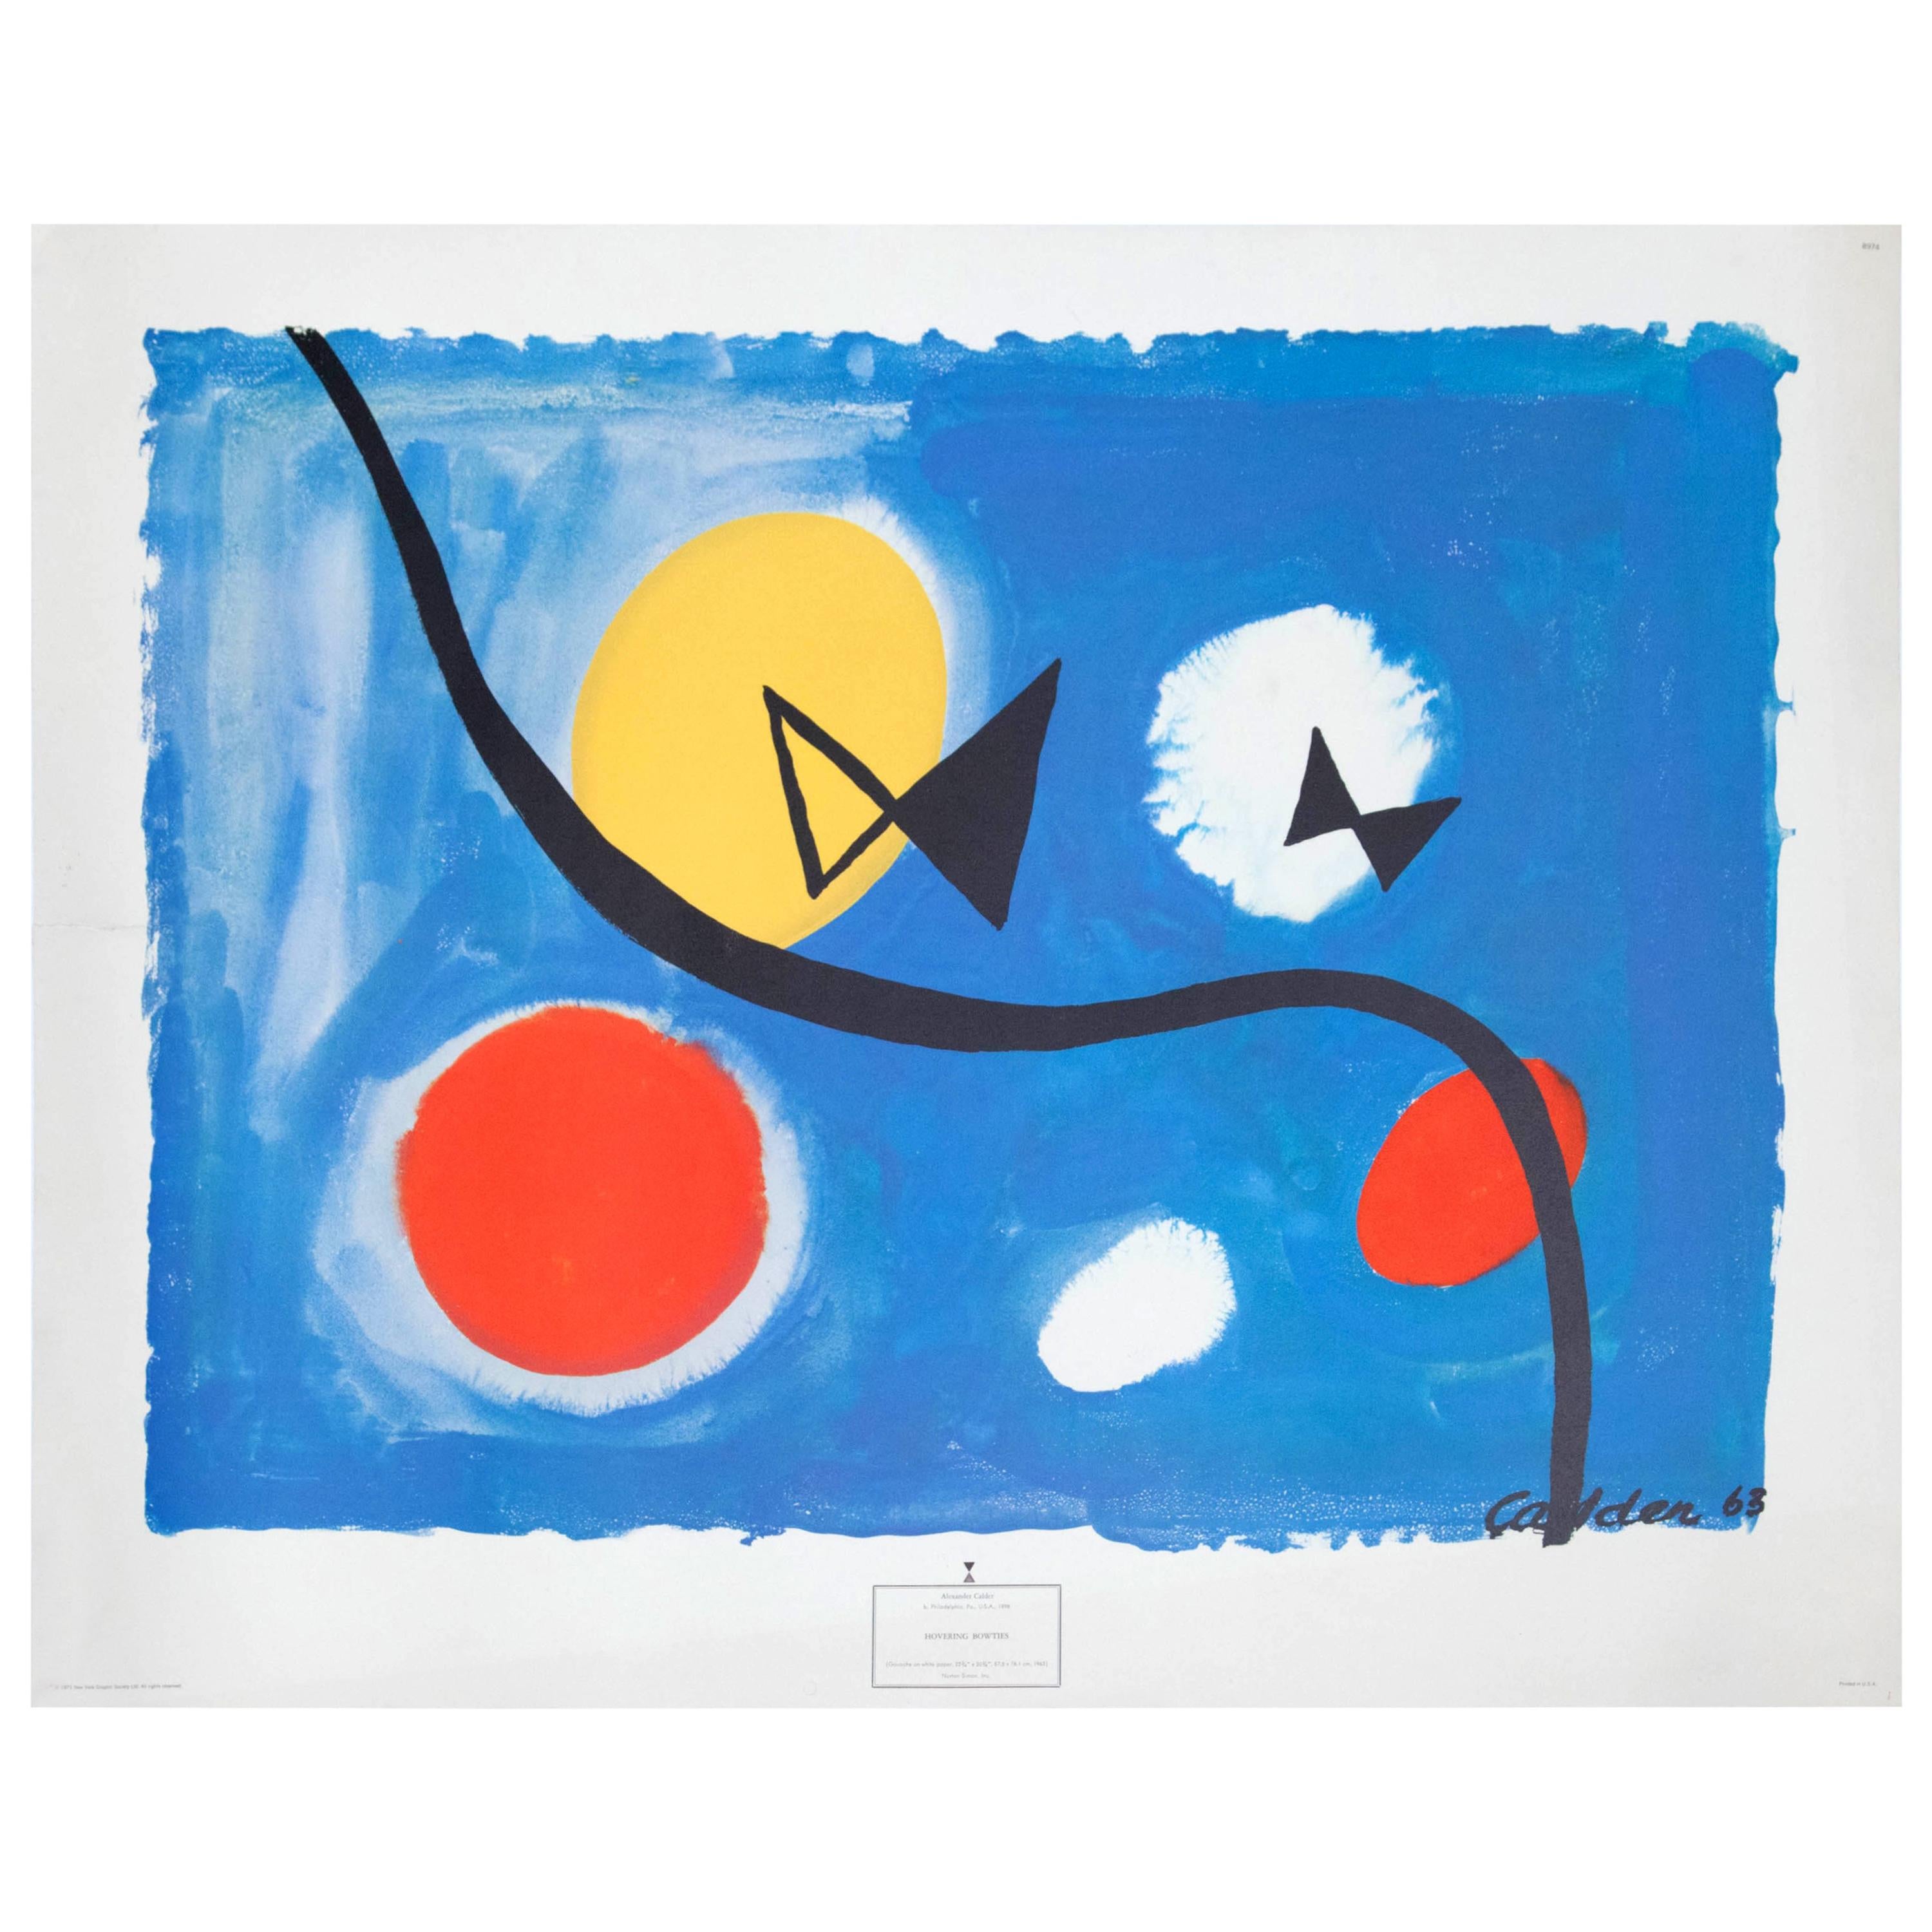 Hovering Bowties of Alexander Calder Lithograph, 1963